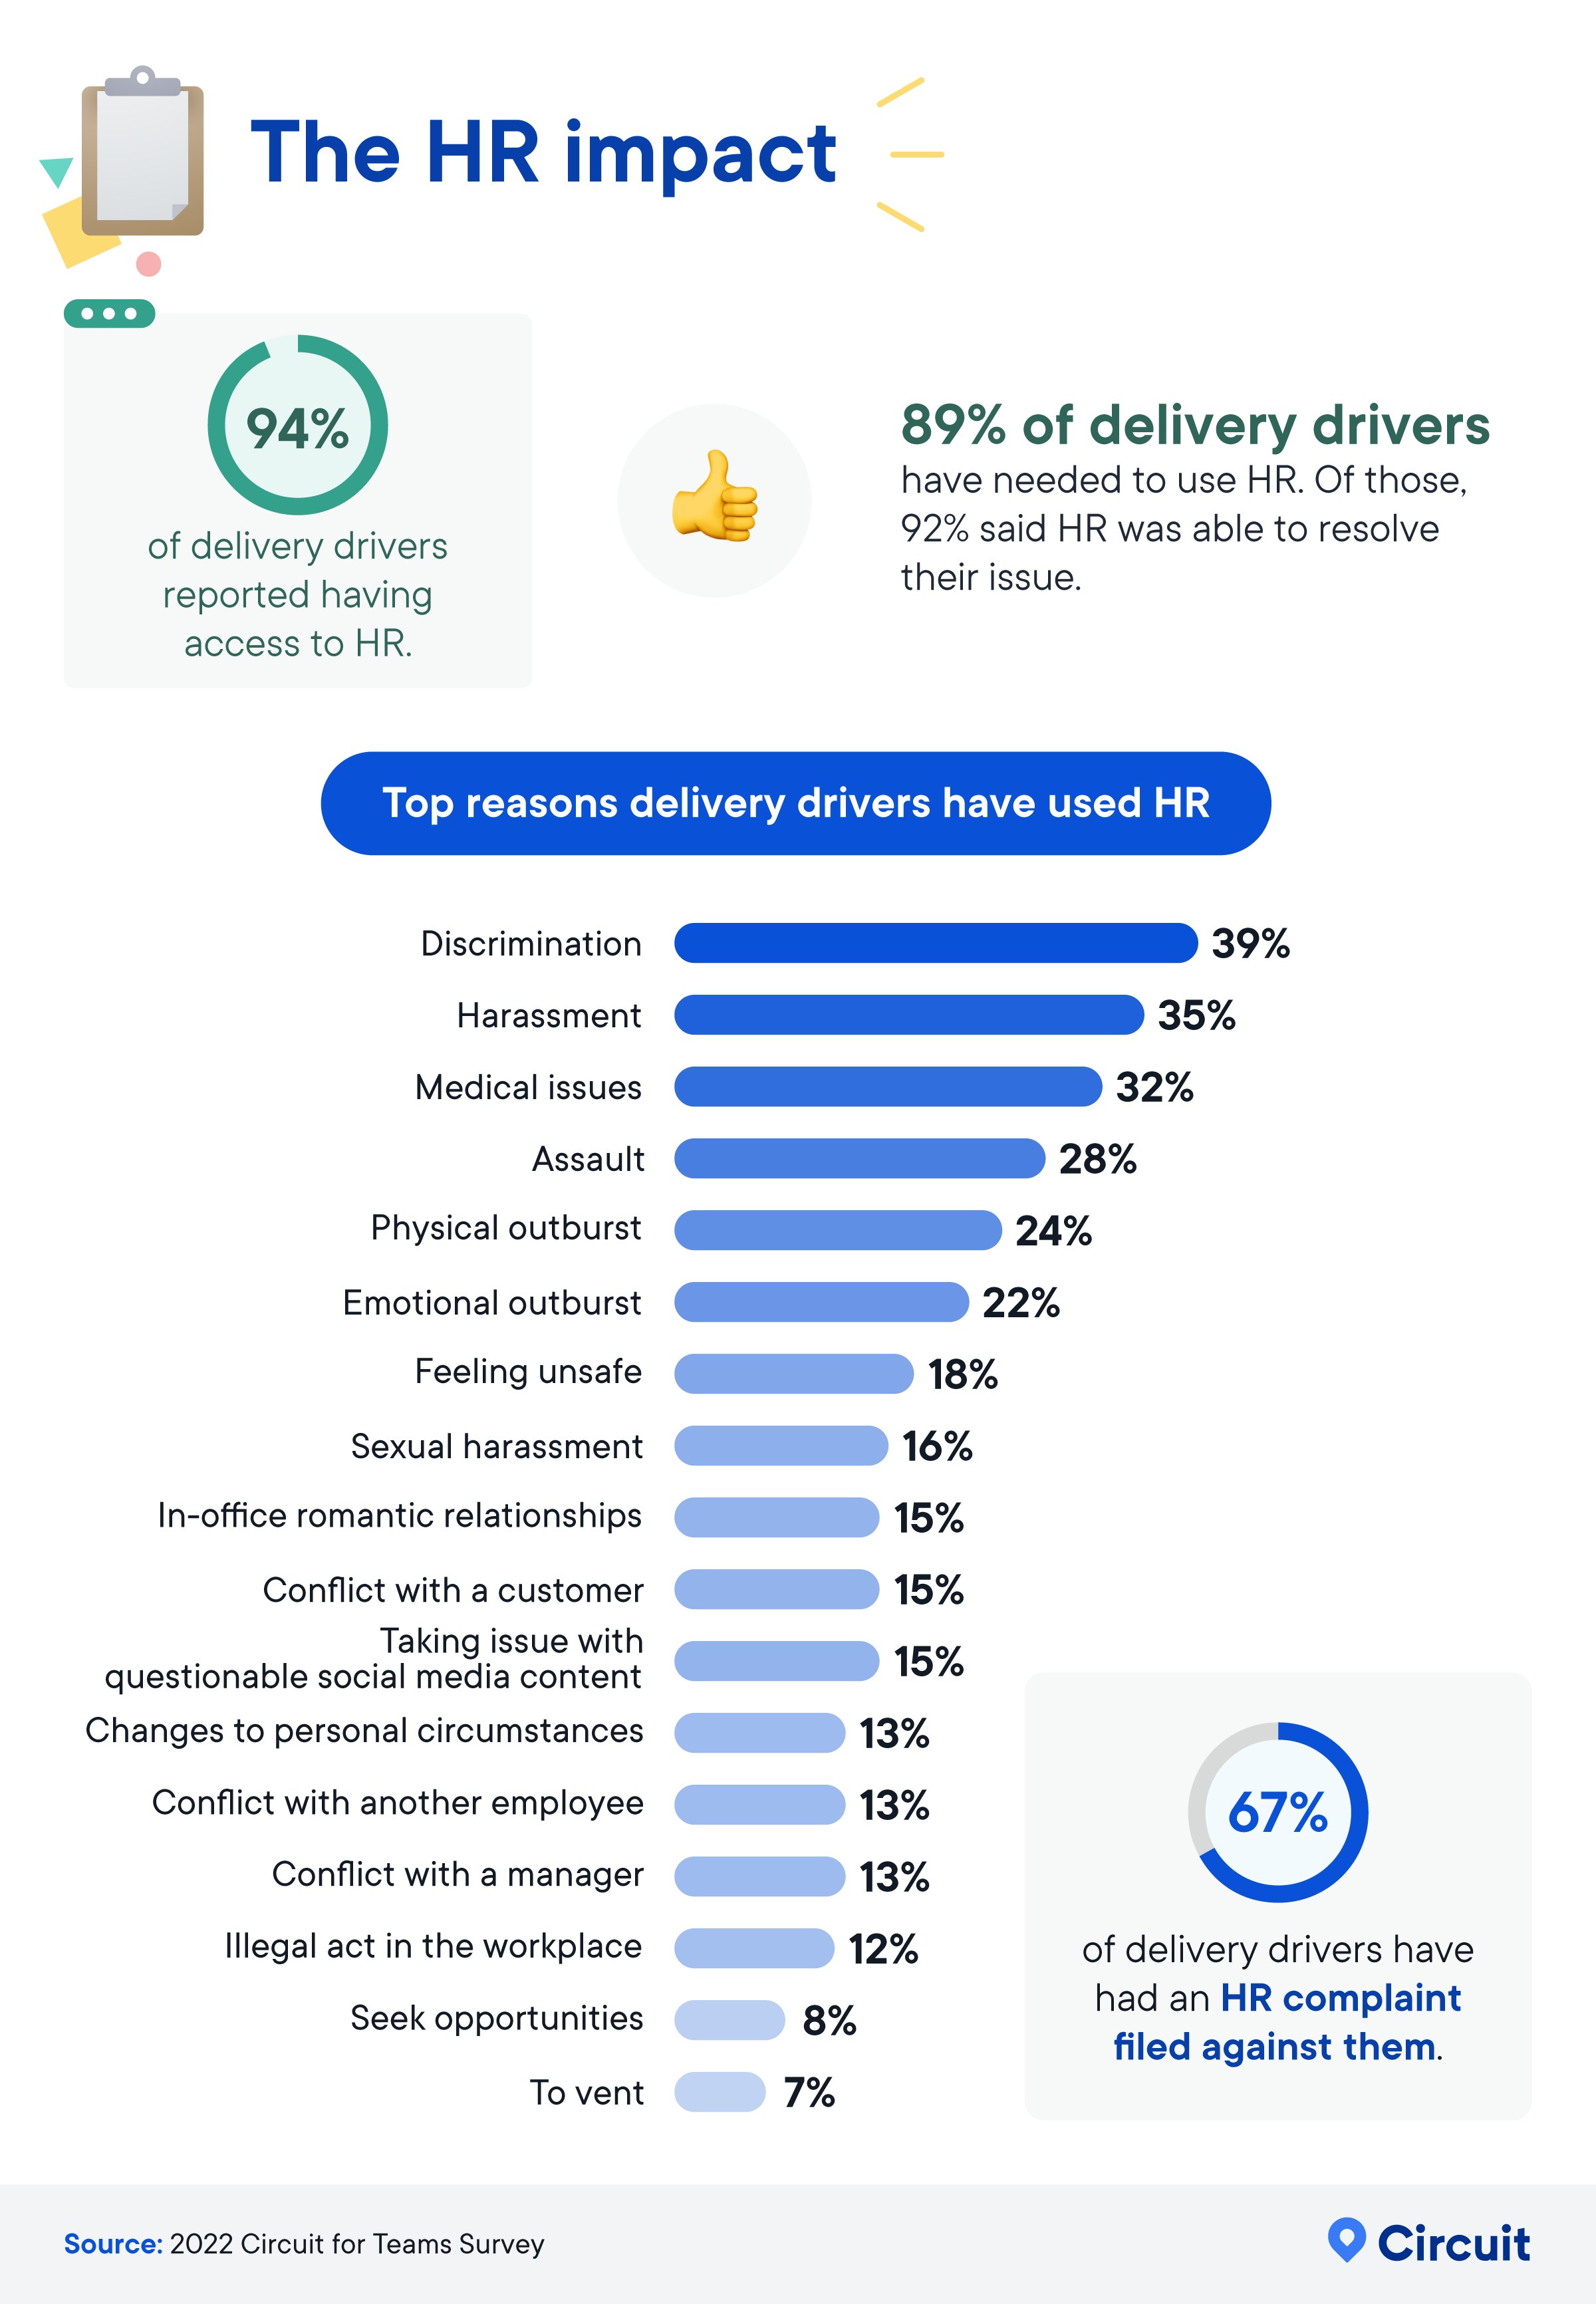 Top reasons delivery drivers have used HR infographic